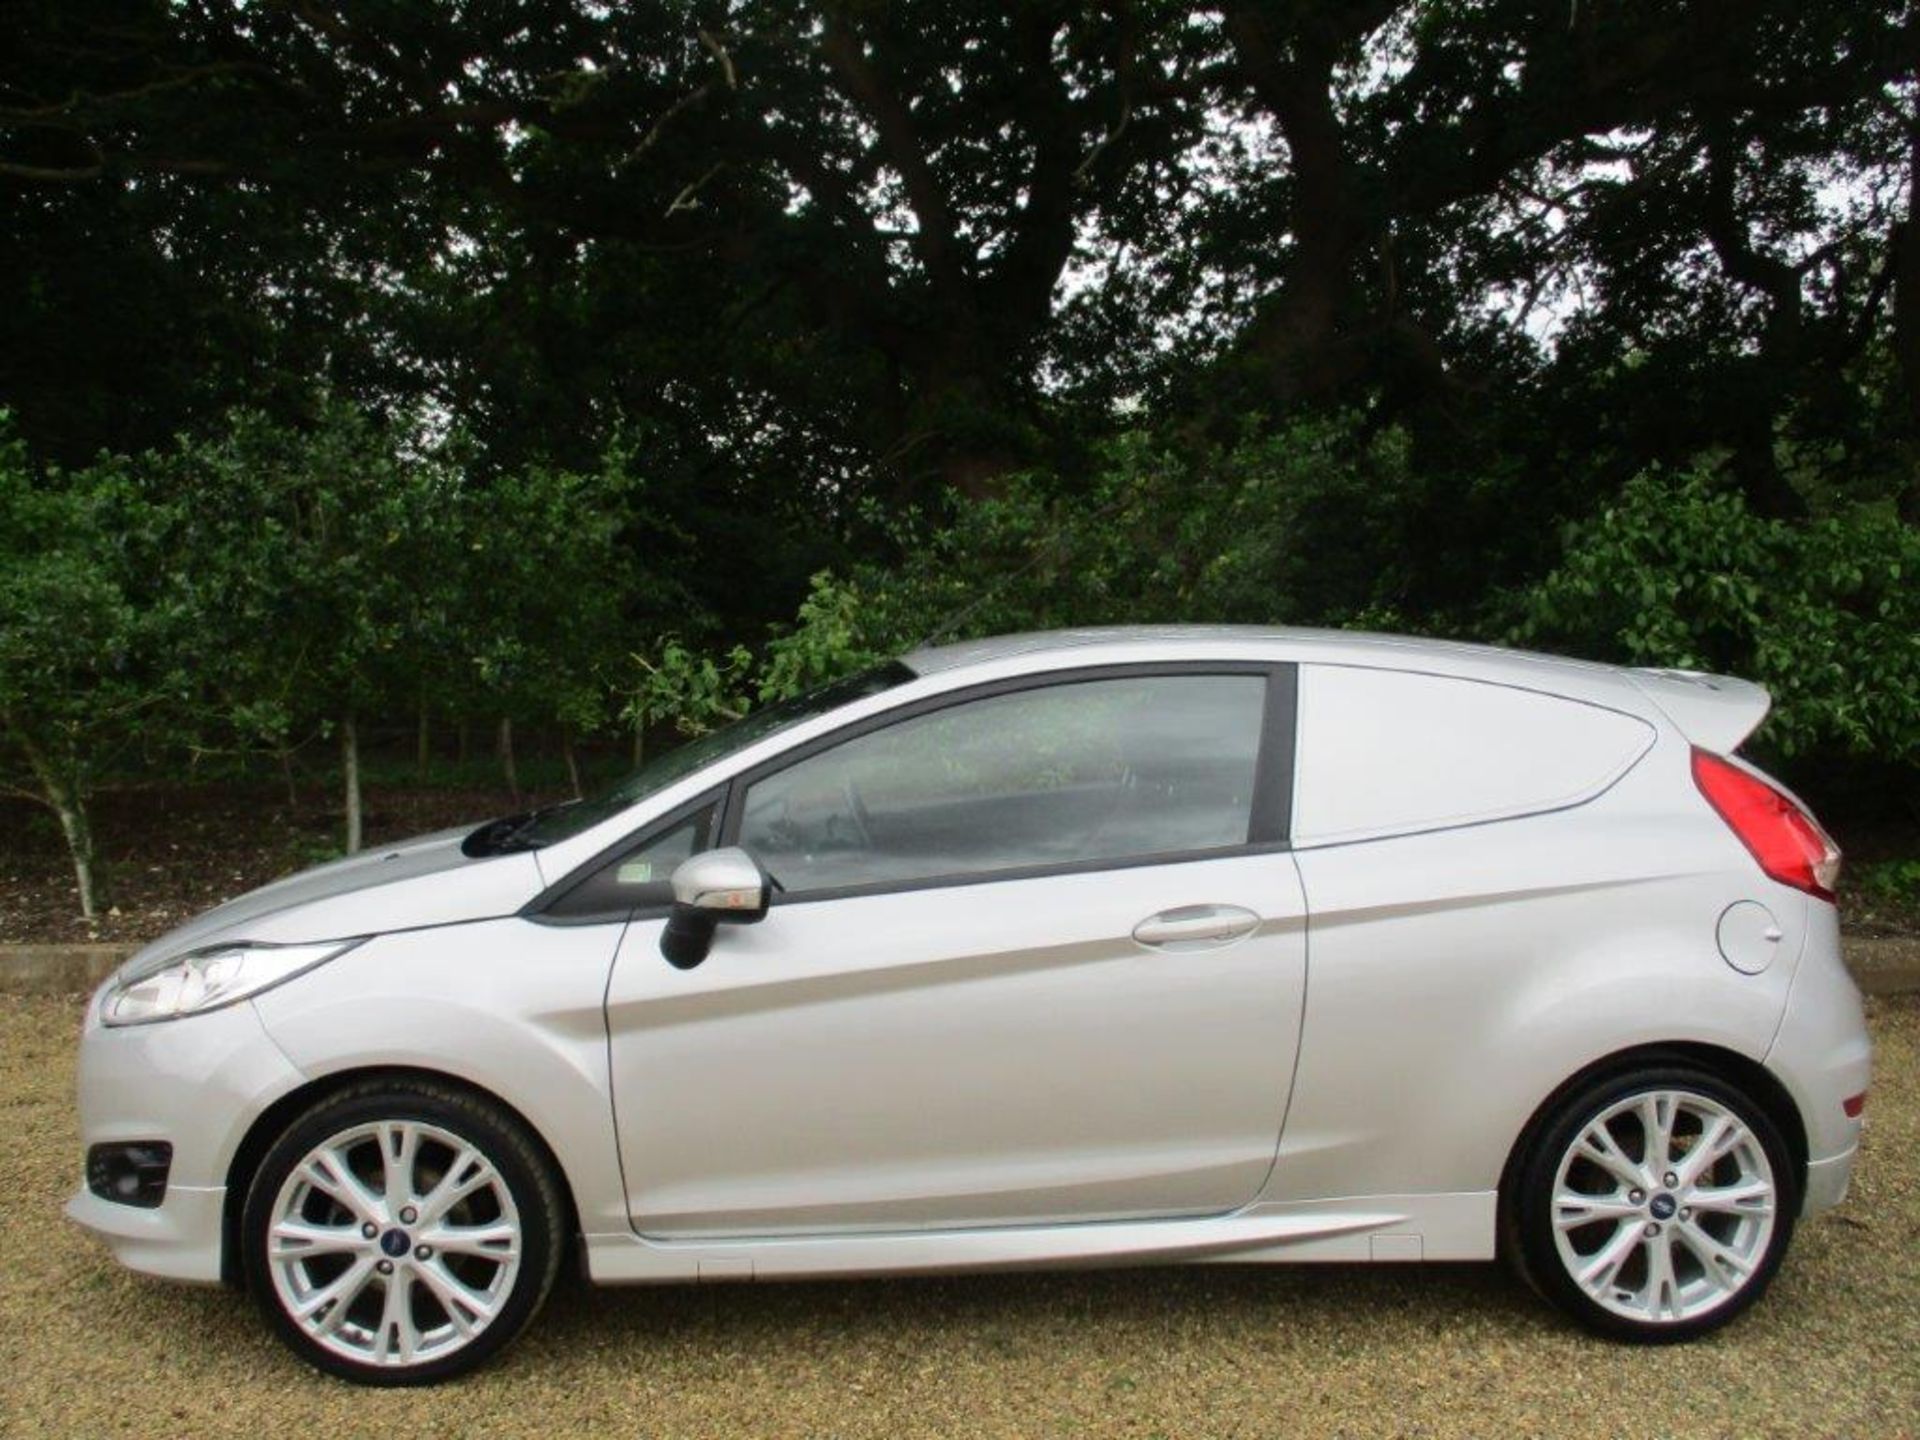 63 14 Ford Fiesta Sport TDCI - Image 2 of 23